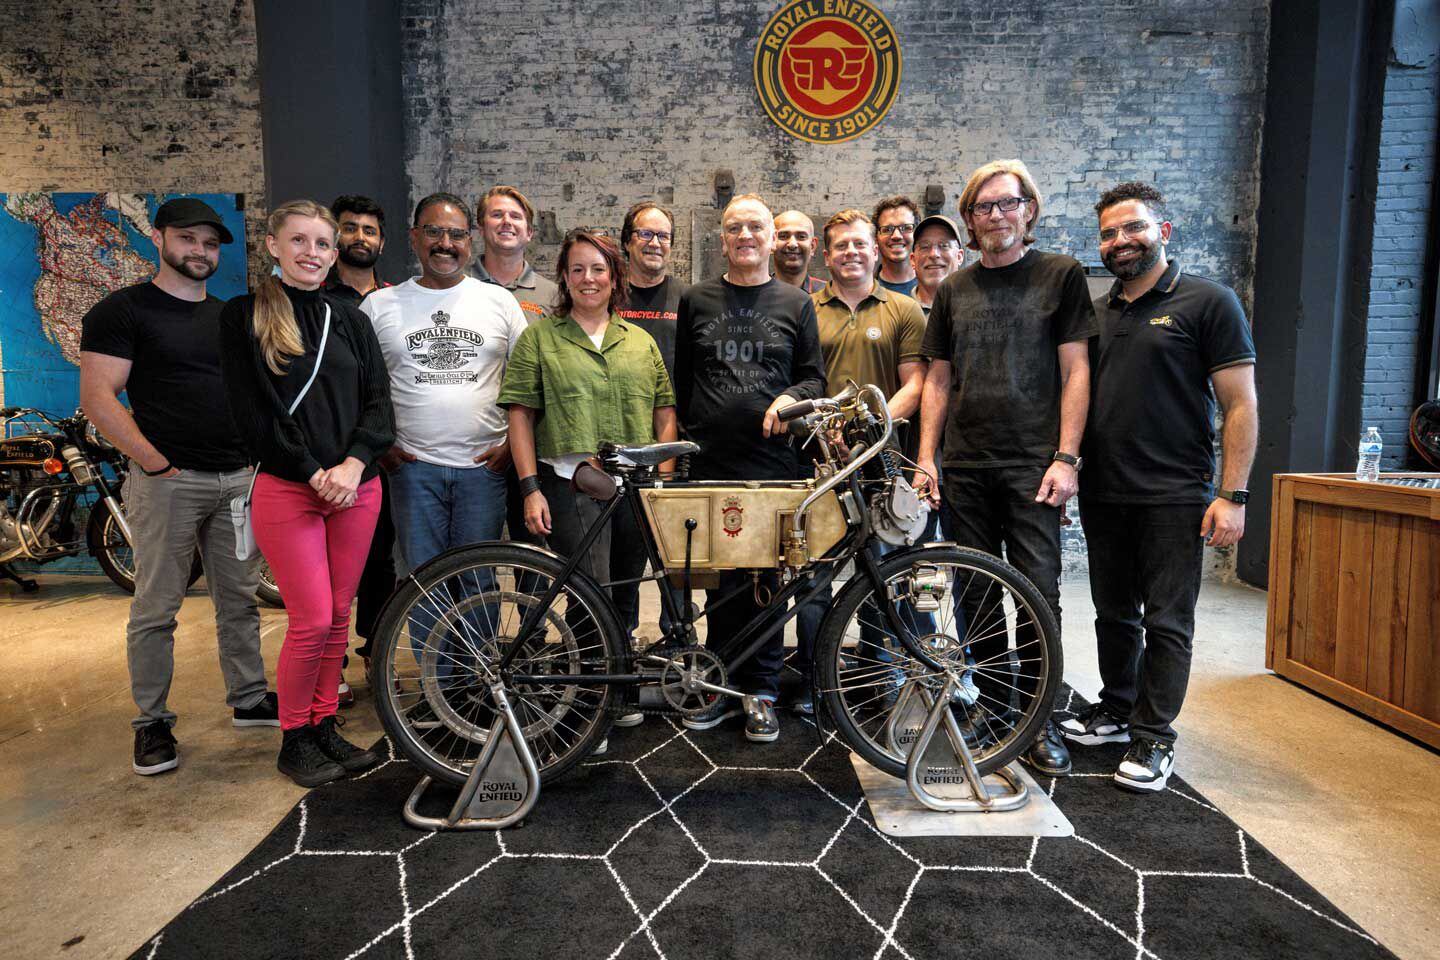 More than a village, it takes an international team of builders, engineers, and experts to recreate a 120-year-old motorcycle.